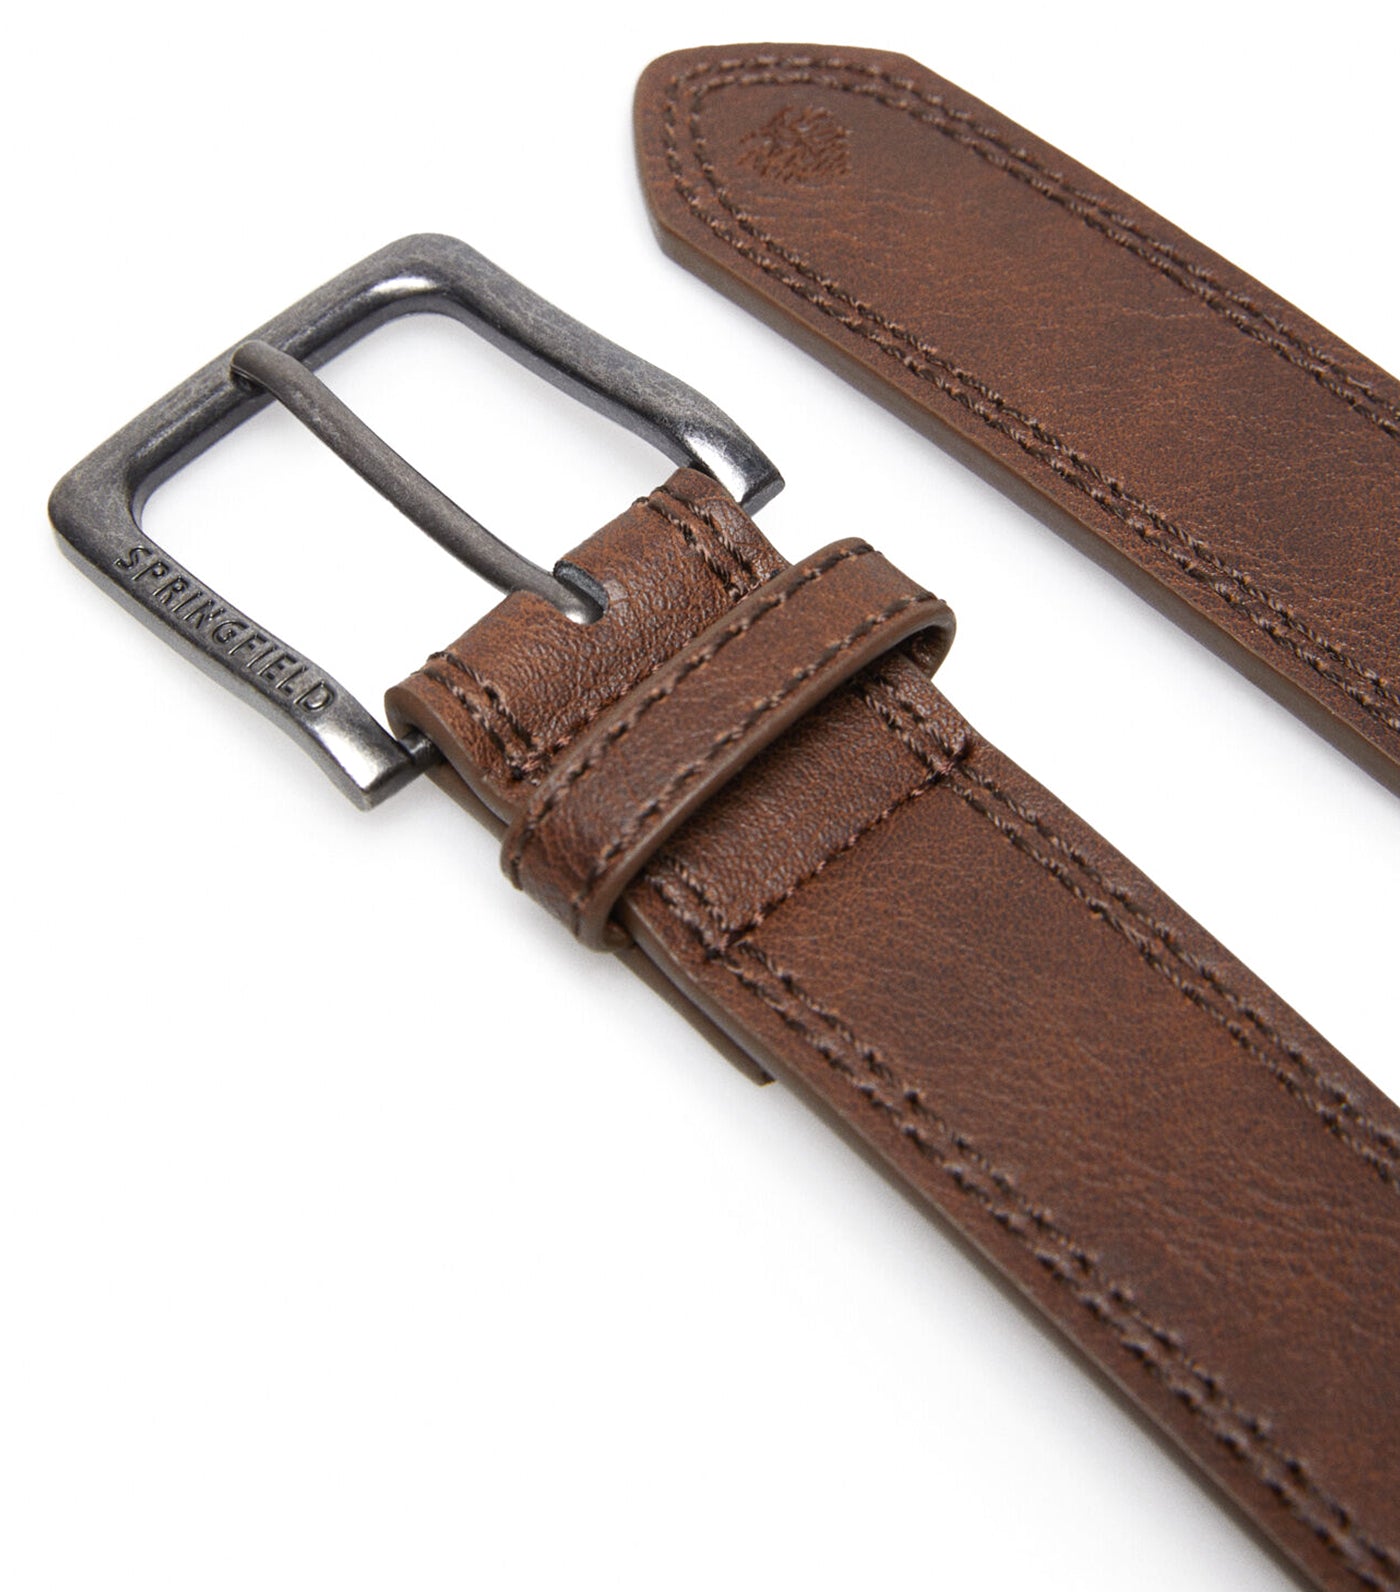 Faux Leather Belt with Stitching Dark Brown